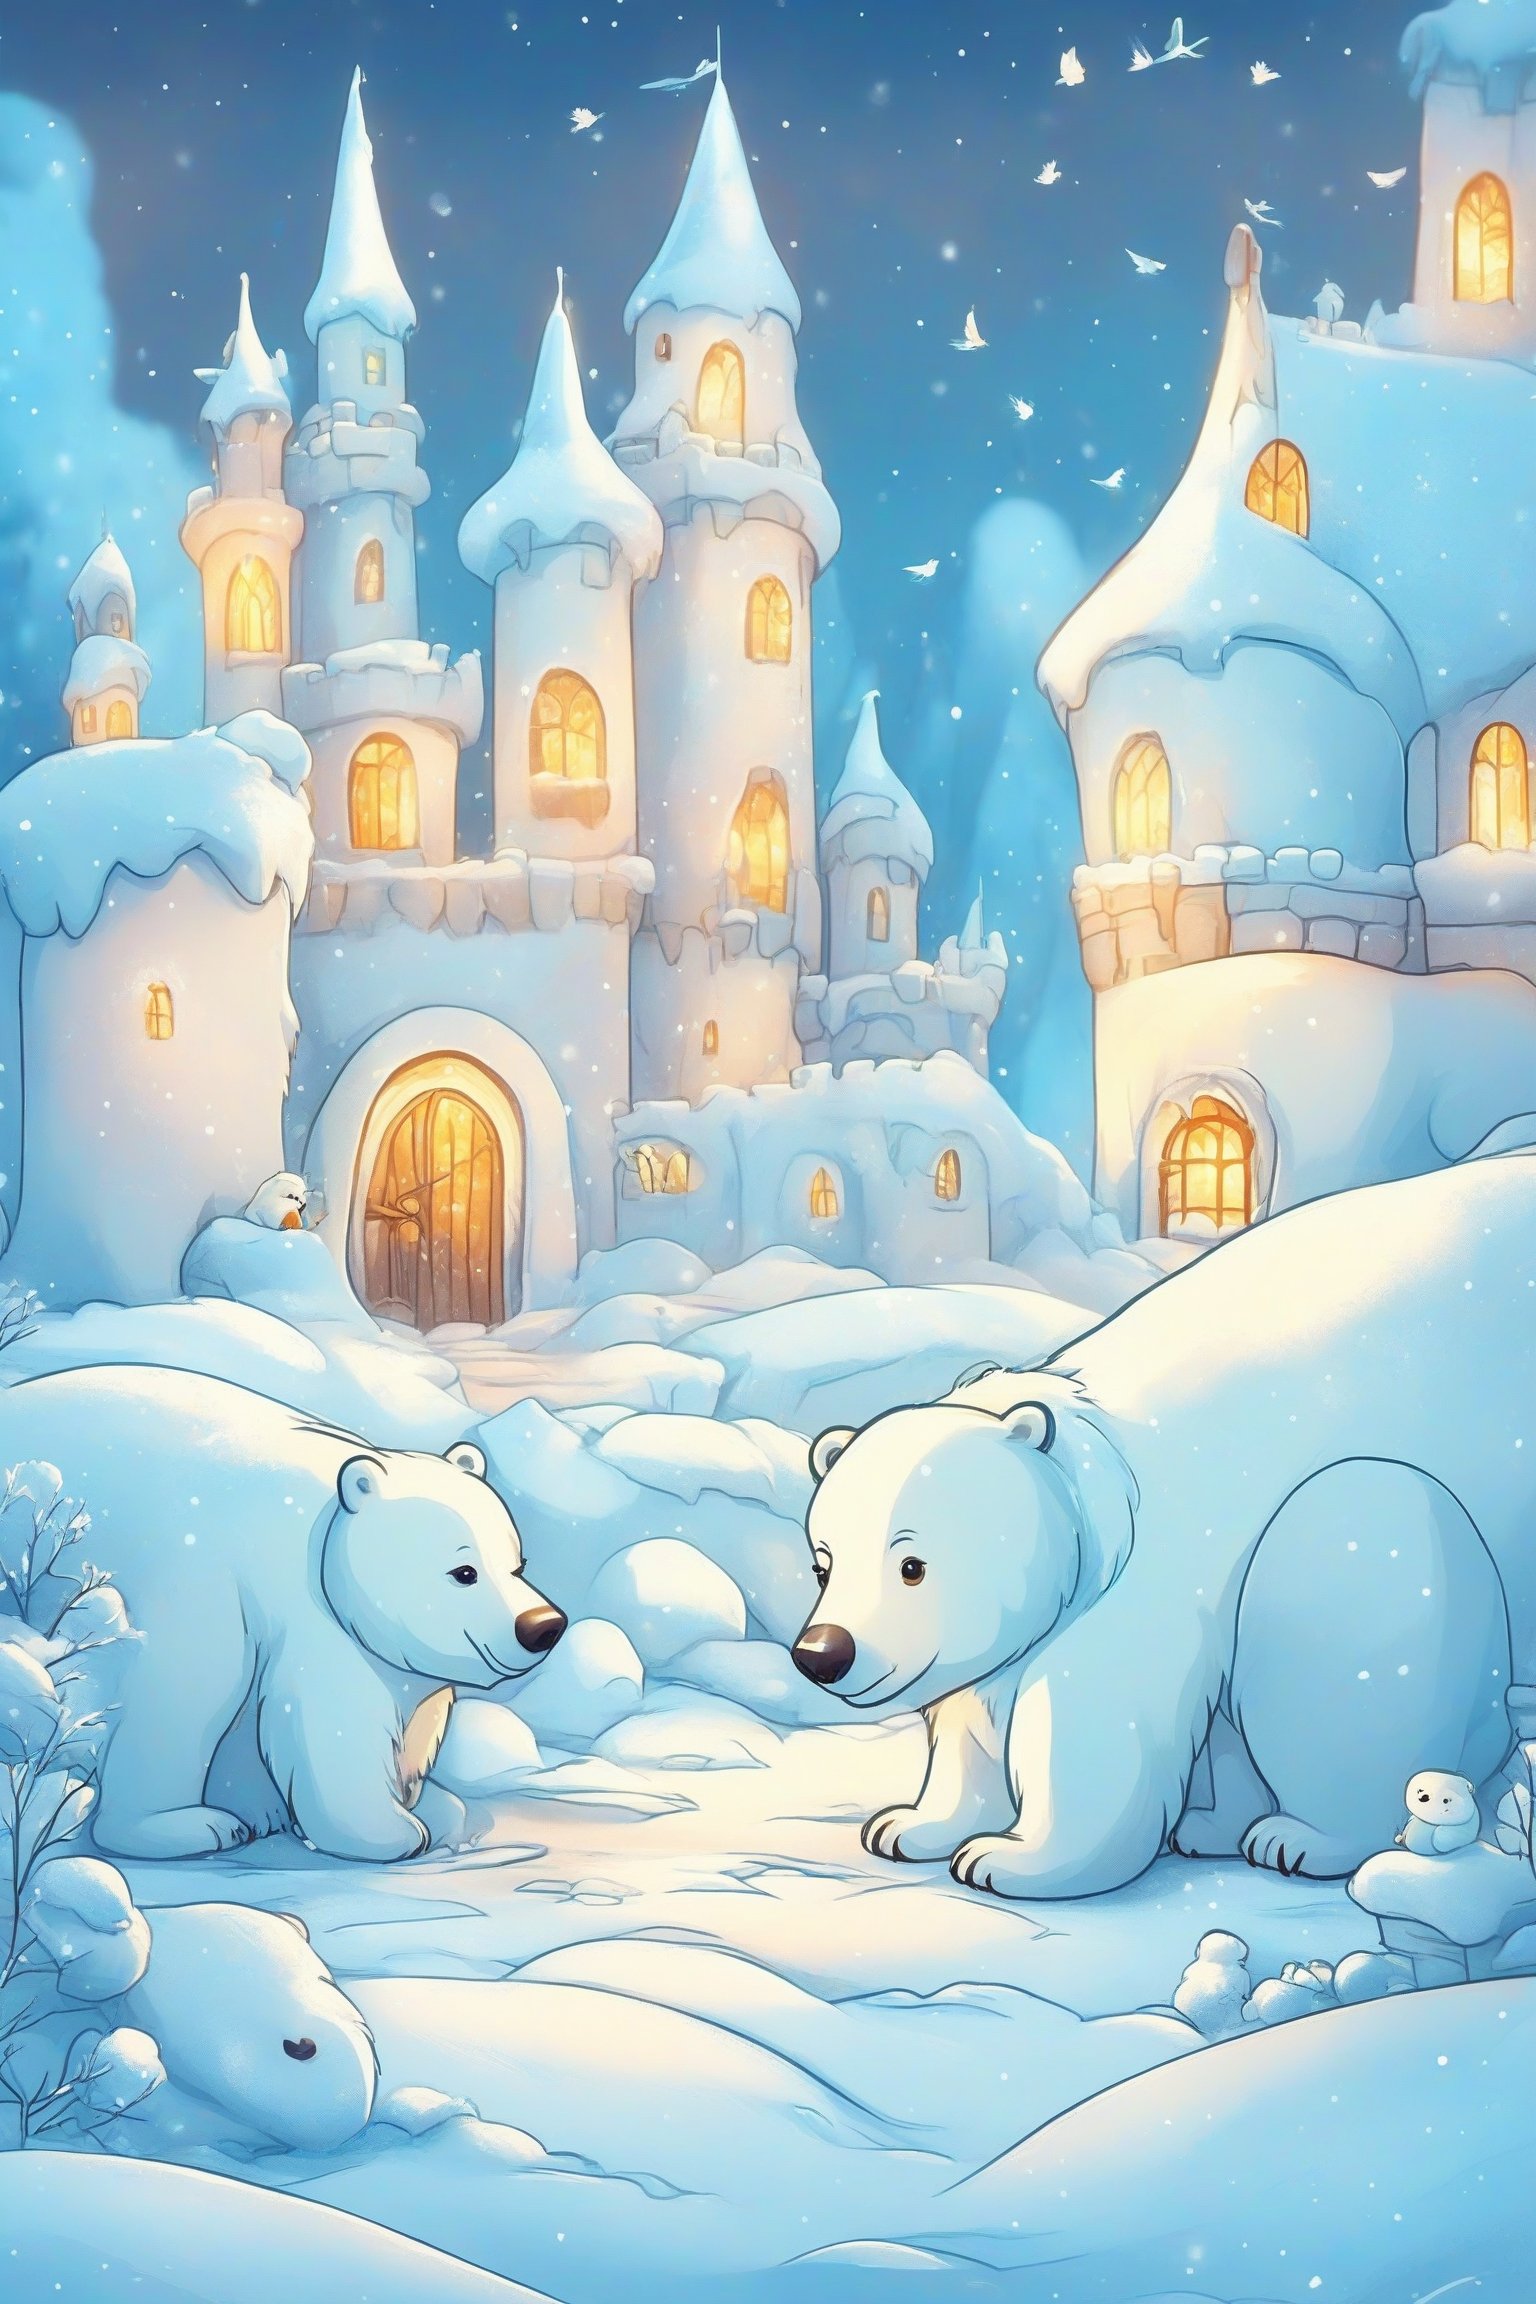 A serene winter landscape with a large polar bear standing near a smaller bear cub. They are both surrounded by a blanket of snow, with a small bird flying nearby. In the background, there's a whimsical castle-like structure covered in snow, with warm lights emanating from its windows. The sky is painted in hues of blue, and the ground is dotted with snow-covered plants and trees. The overall ambiance of the image is calm and magical, evoking feelings of warmth and coziness amidst the cold.